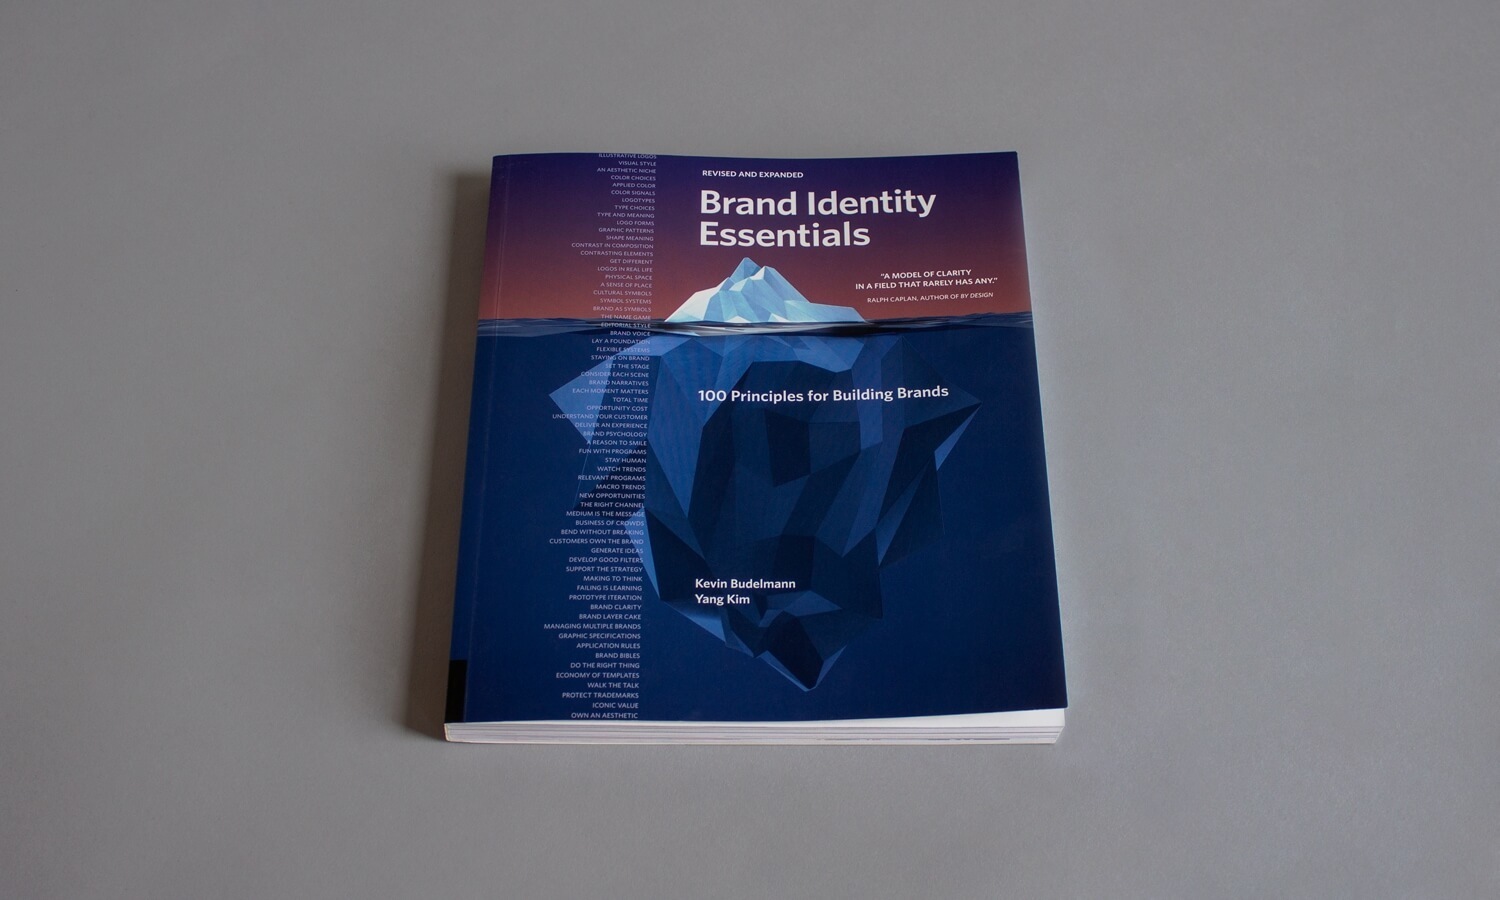 Brand Identity Essentials, Revised and Expanded: 100 Principles for Building Brands